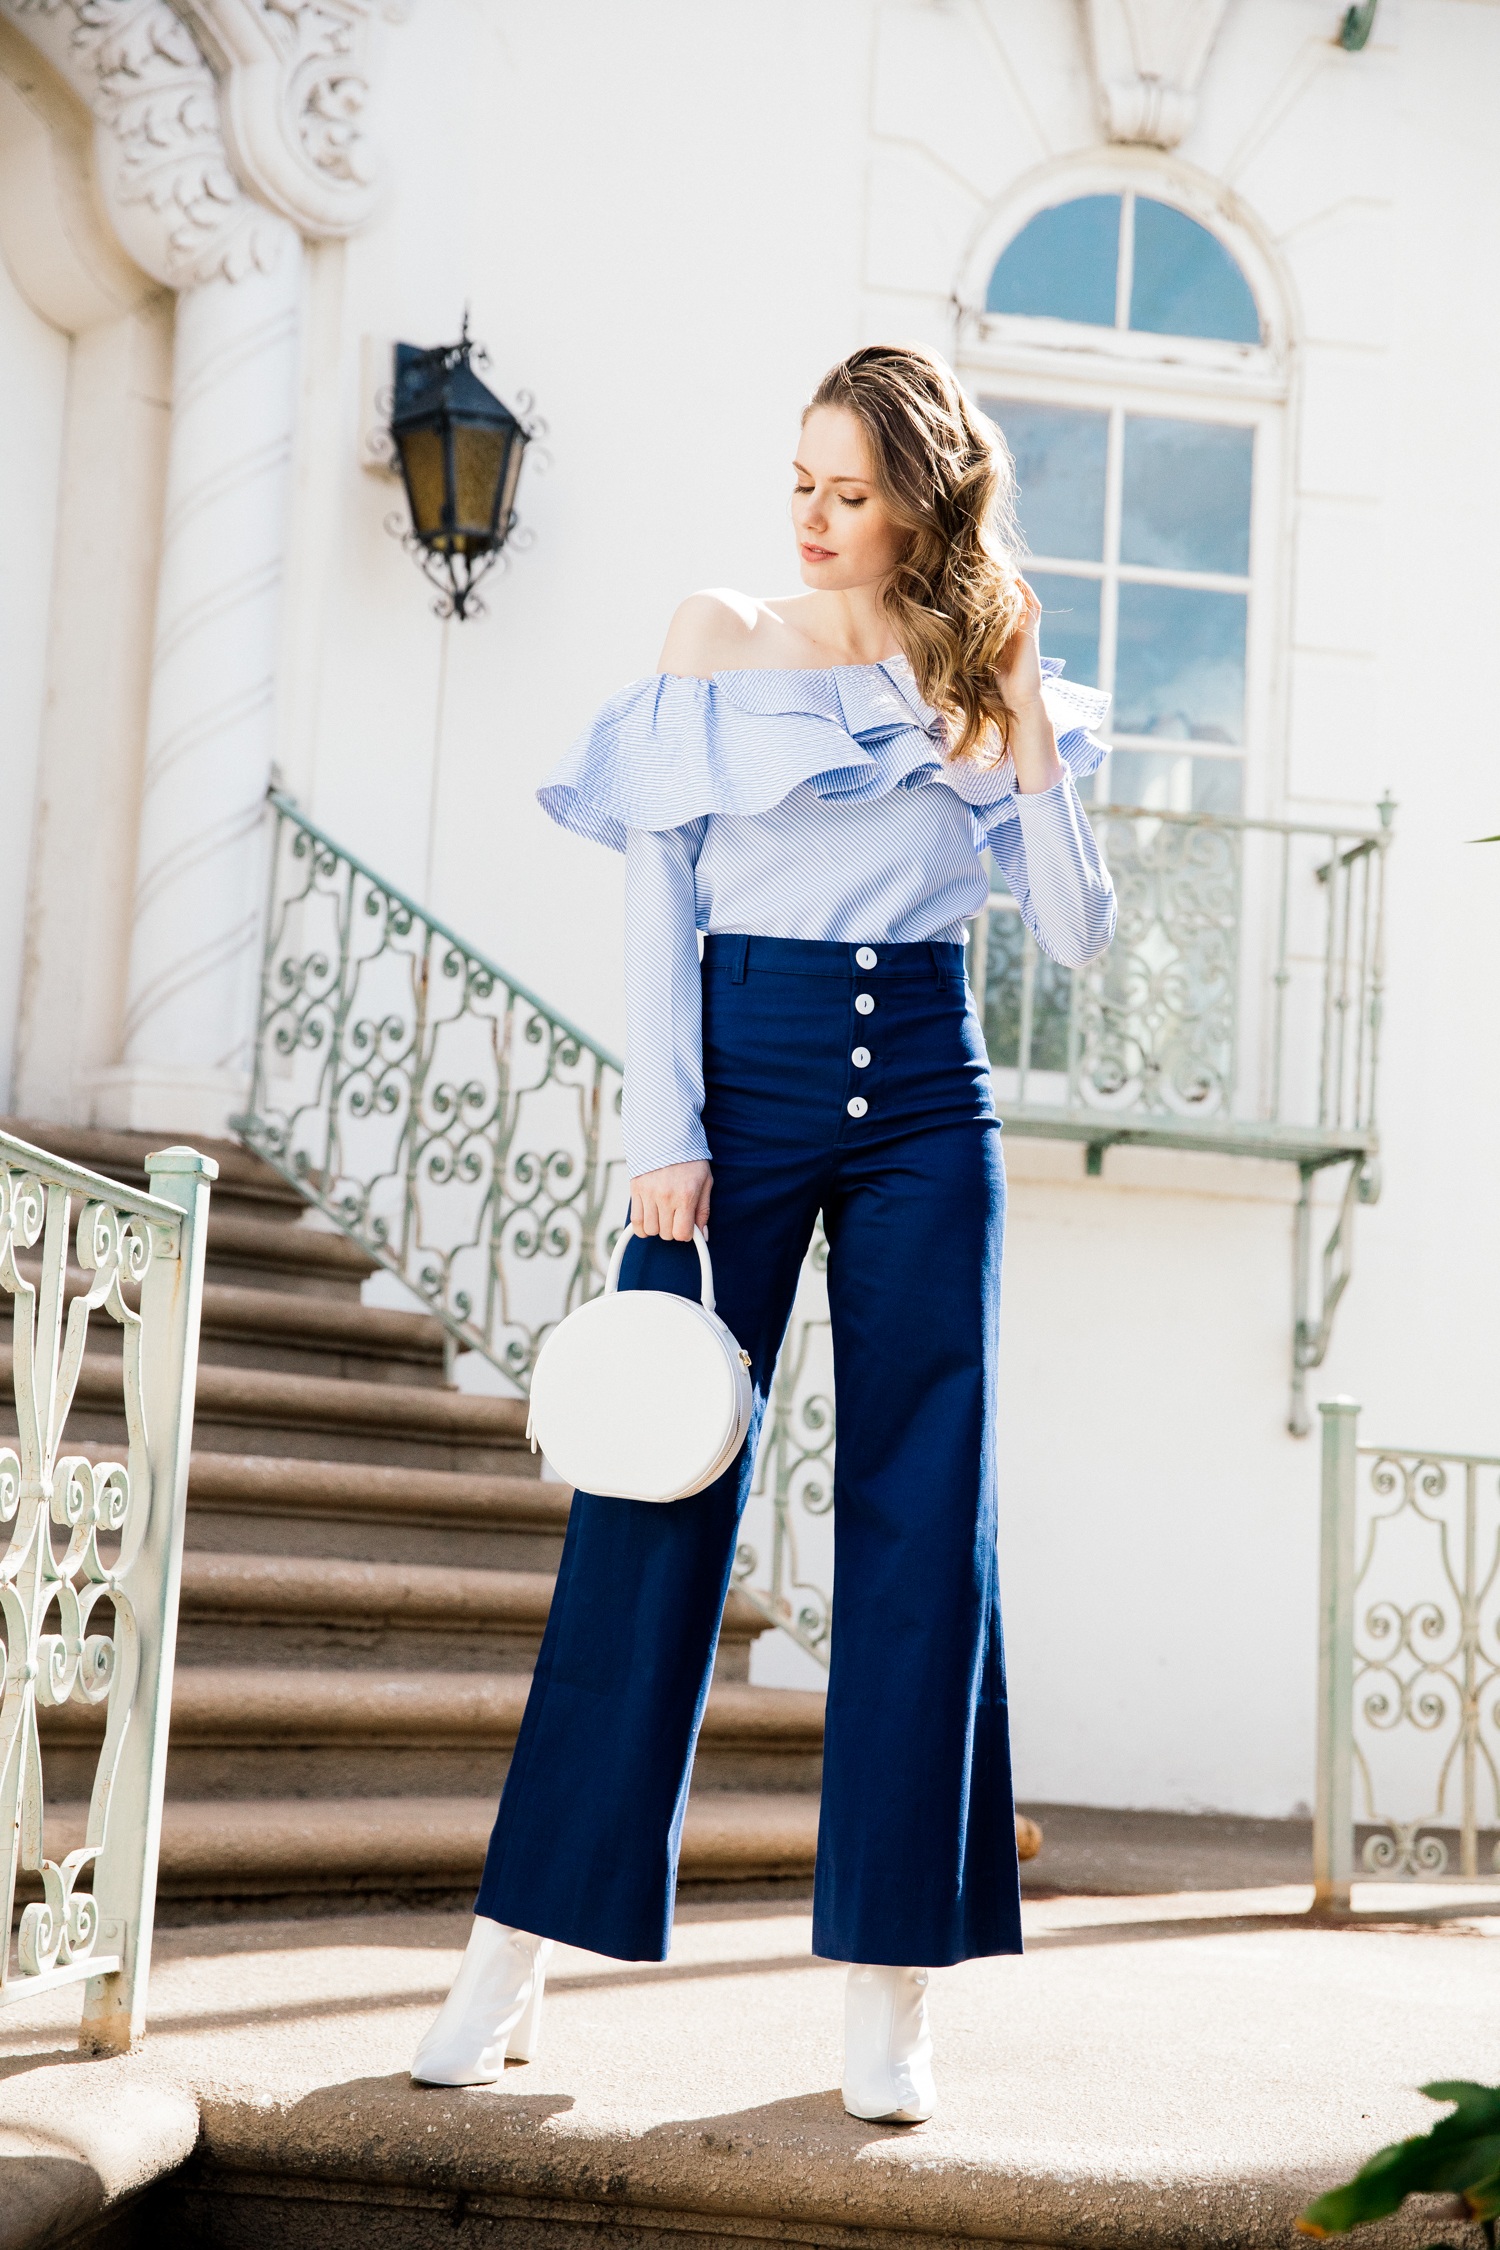 Alyssa Campanella of The A List blog shares white accessories for spring in Staud Novak pants and Mansur Gavriel white circle bag